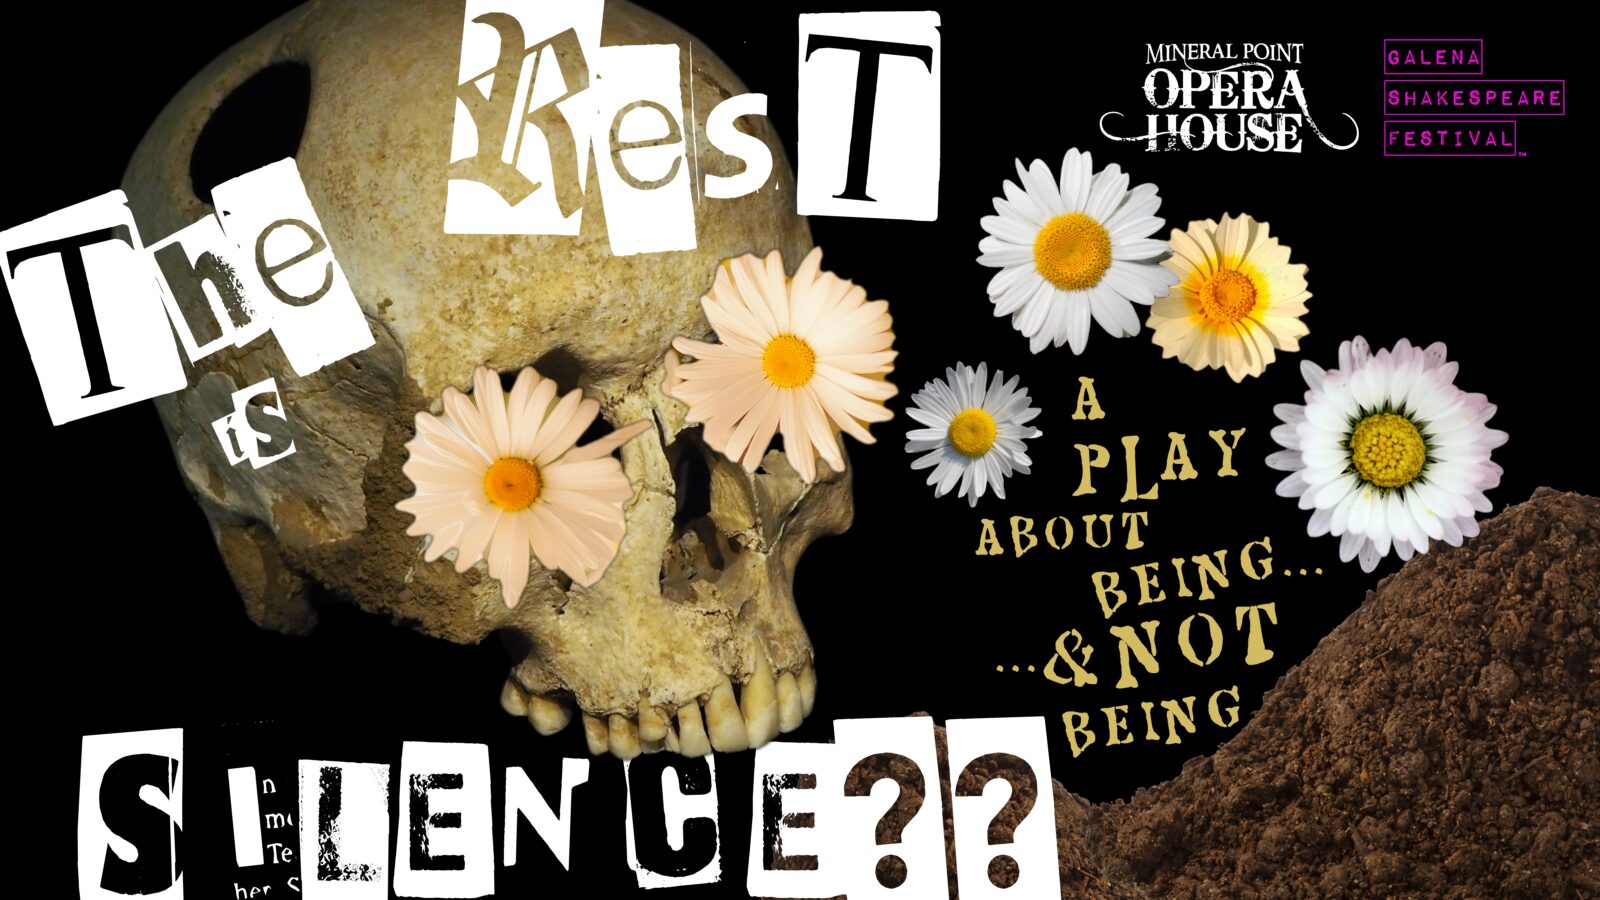 The Rest Is Silence?? A Play About Being And Not Being